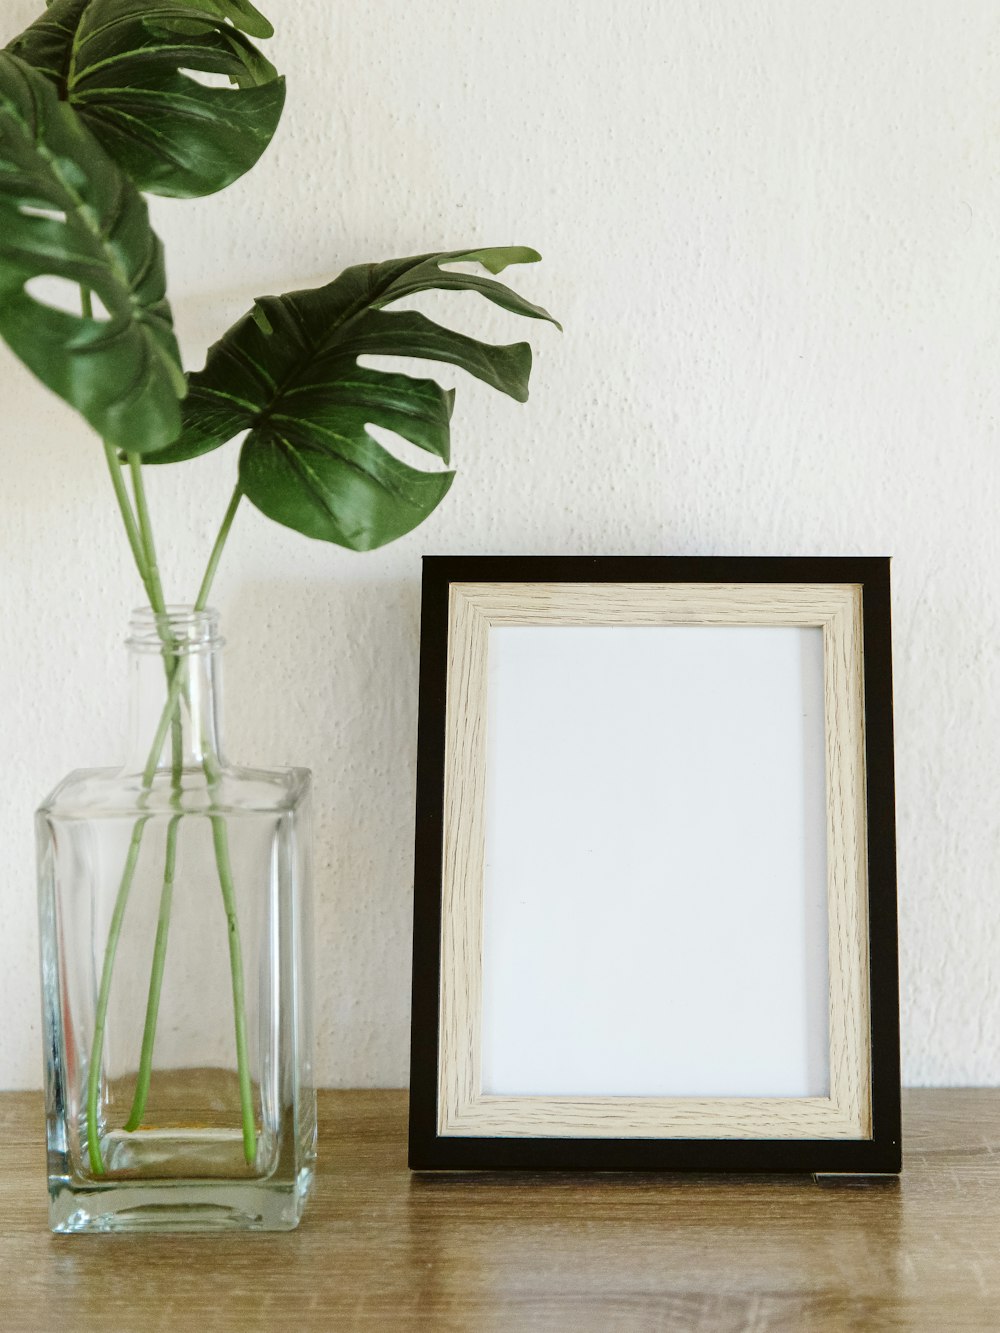 a plant in a vase next to a picture frame